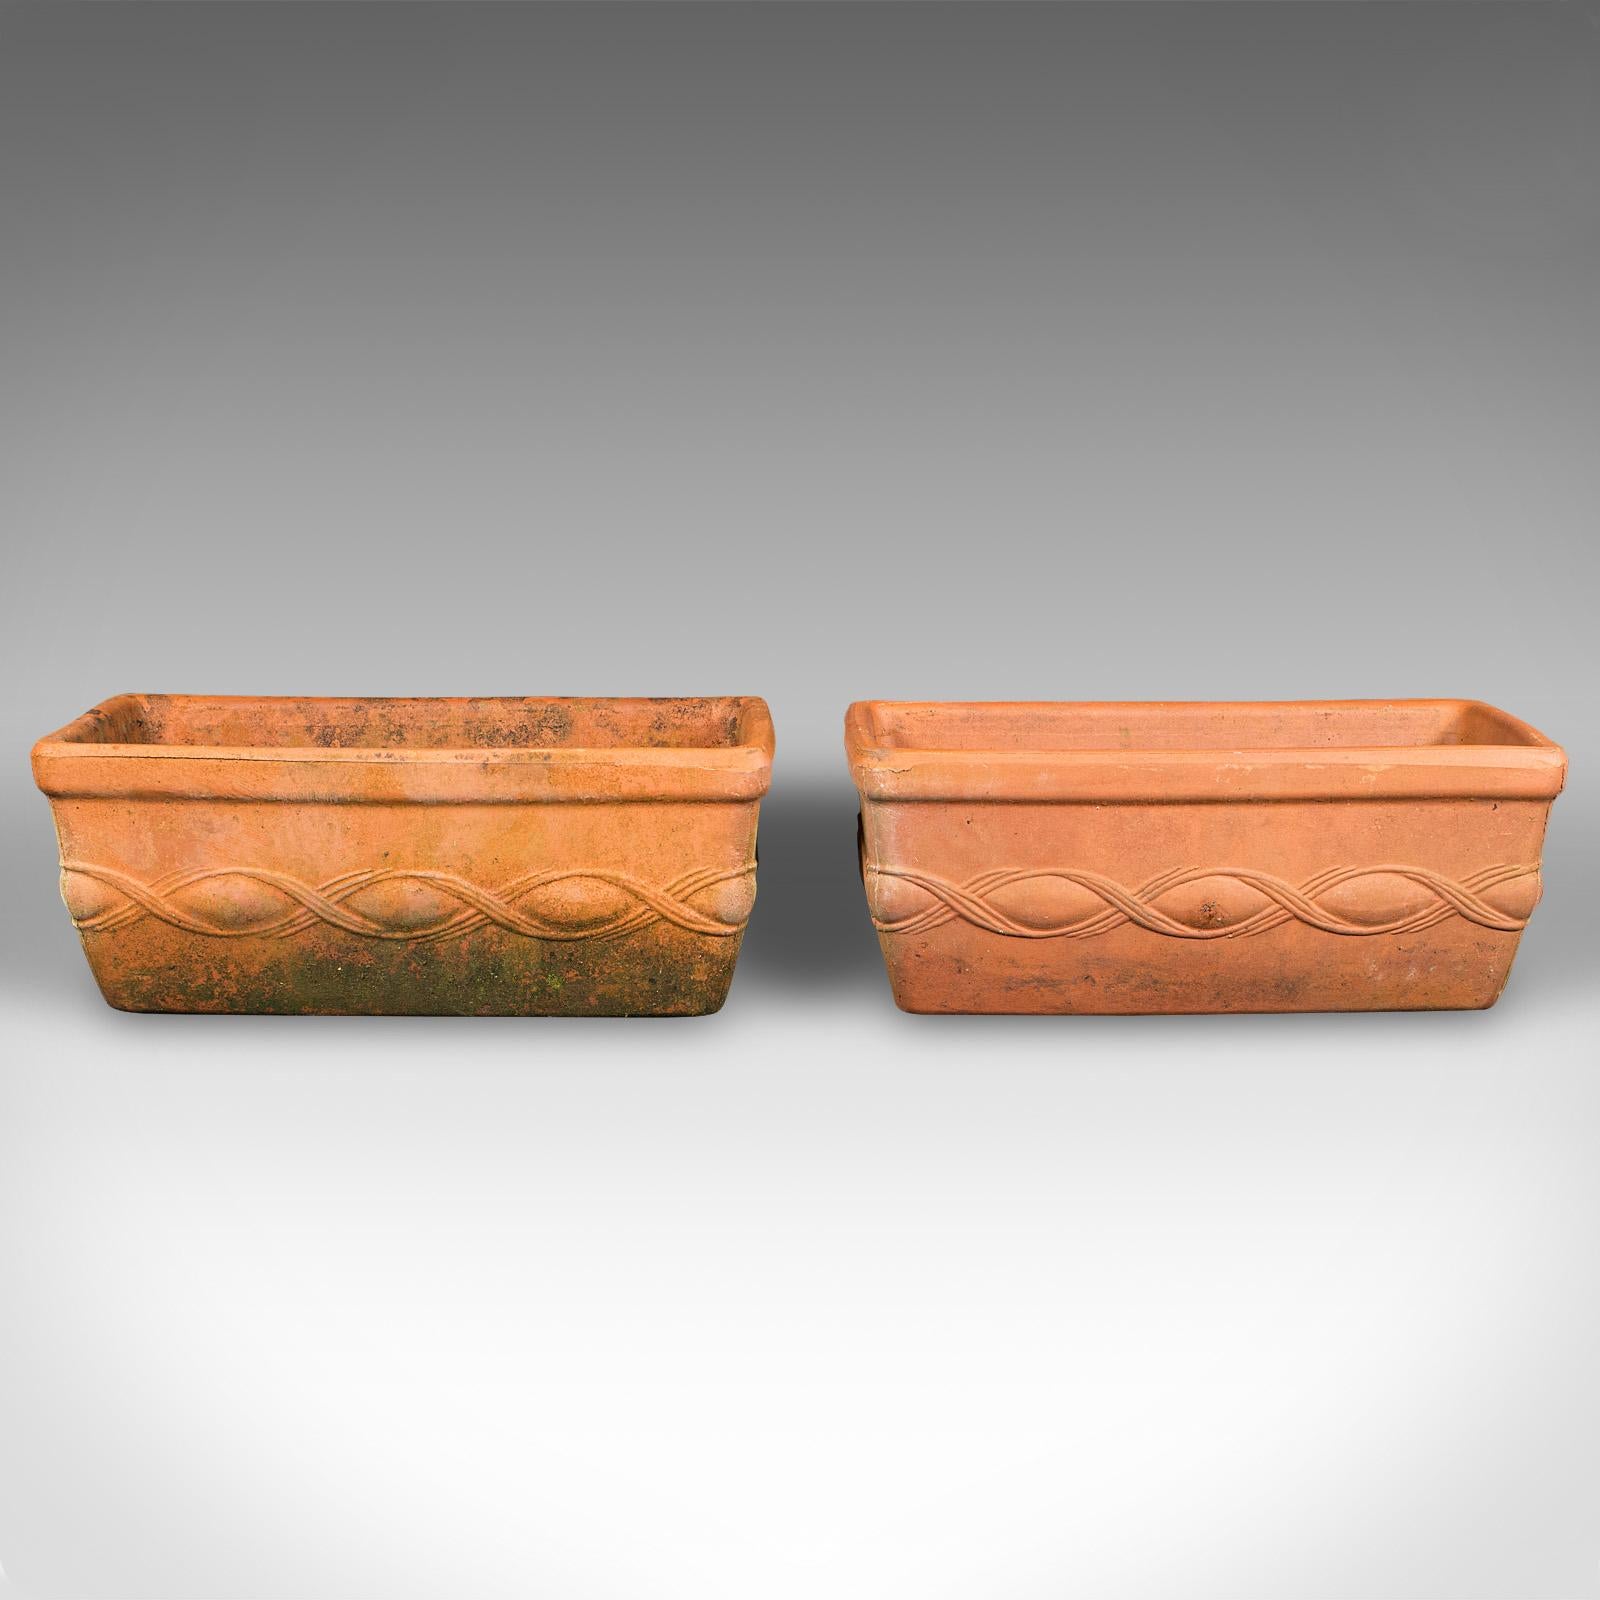 This is a set of 4 vintage windowsill planters. An Italian, terracotta window box jardiniere, dating to the late 20th century, circa 1970.

Charmingly petite windowsill planters, ideal for a chic apartment or townhouse
Displaying a desirable aged